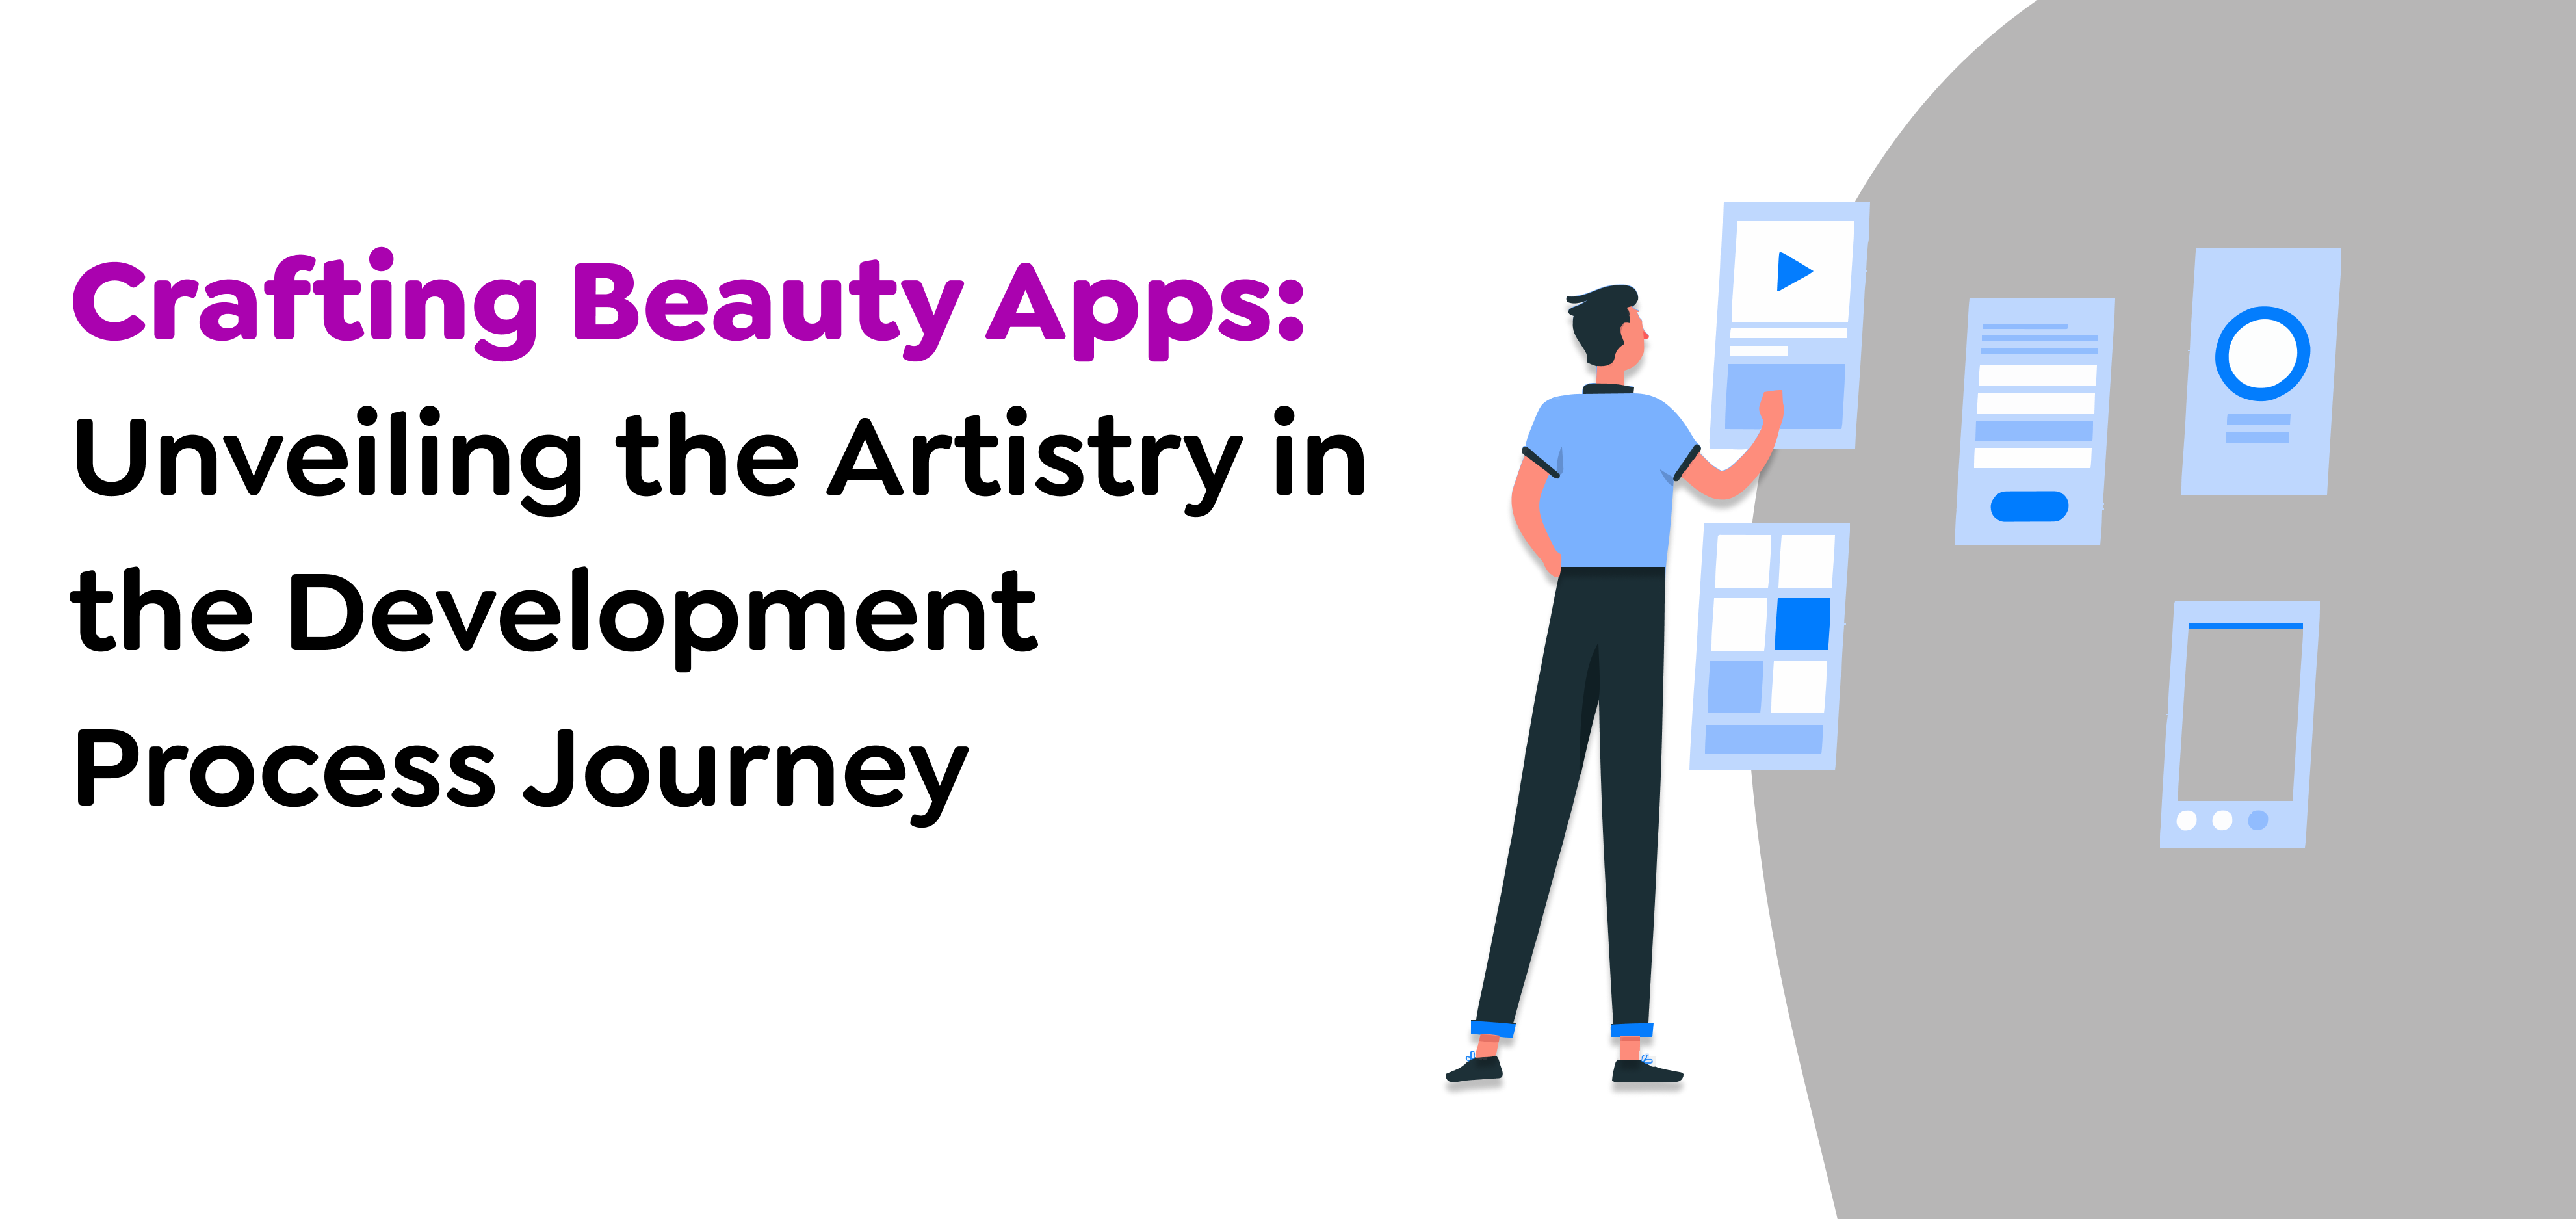 Crafting Beauty Apps